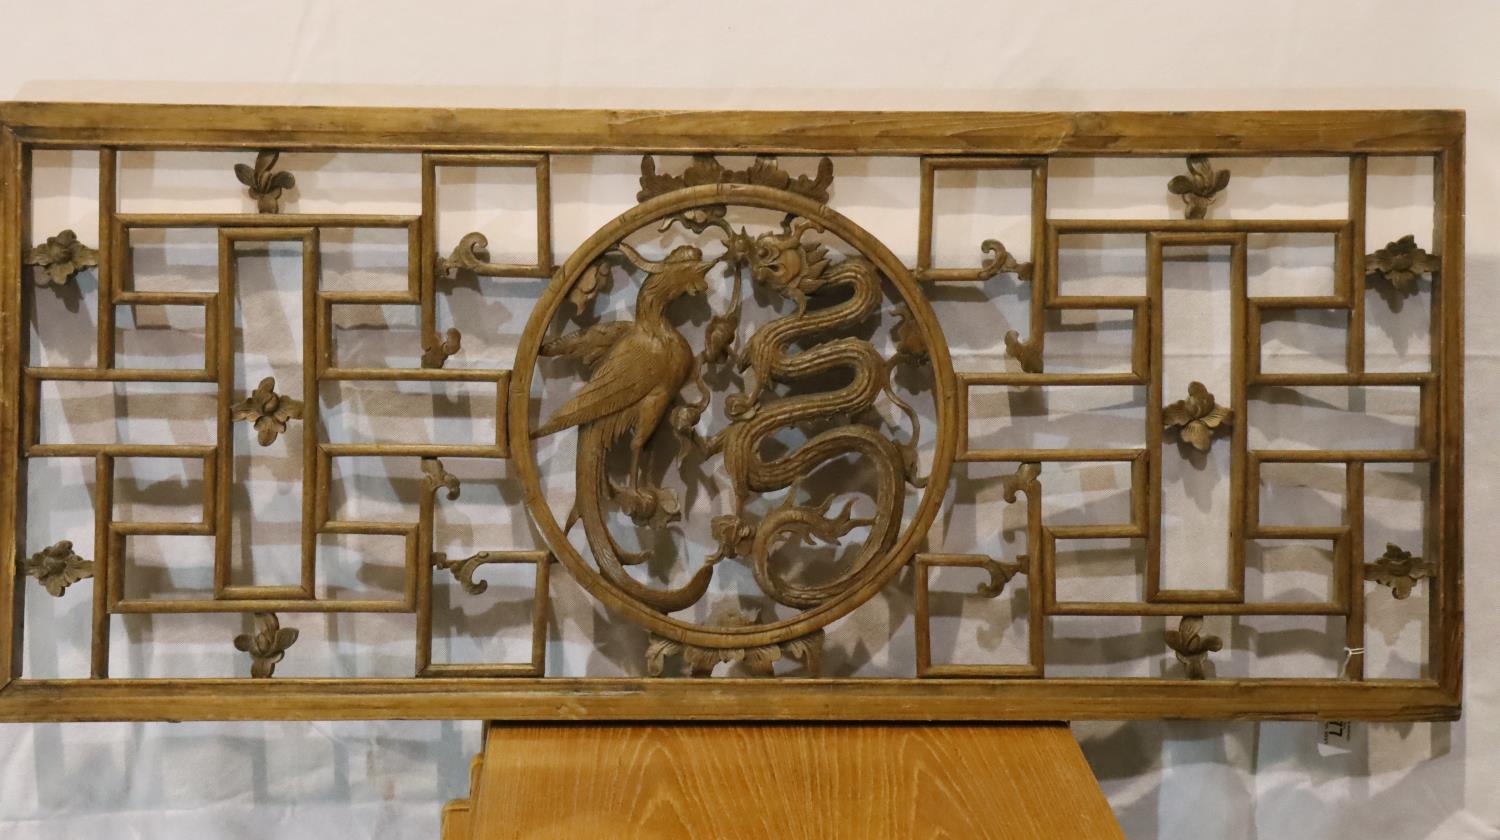 19th Century Chinese fretwork wooden panel with dragon and phoenix central motif, 49 x 112 cm. Not